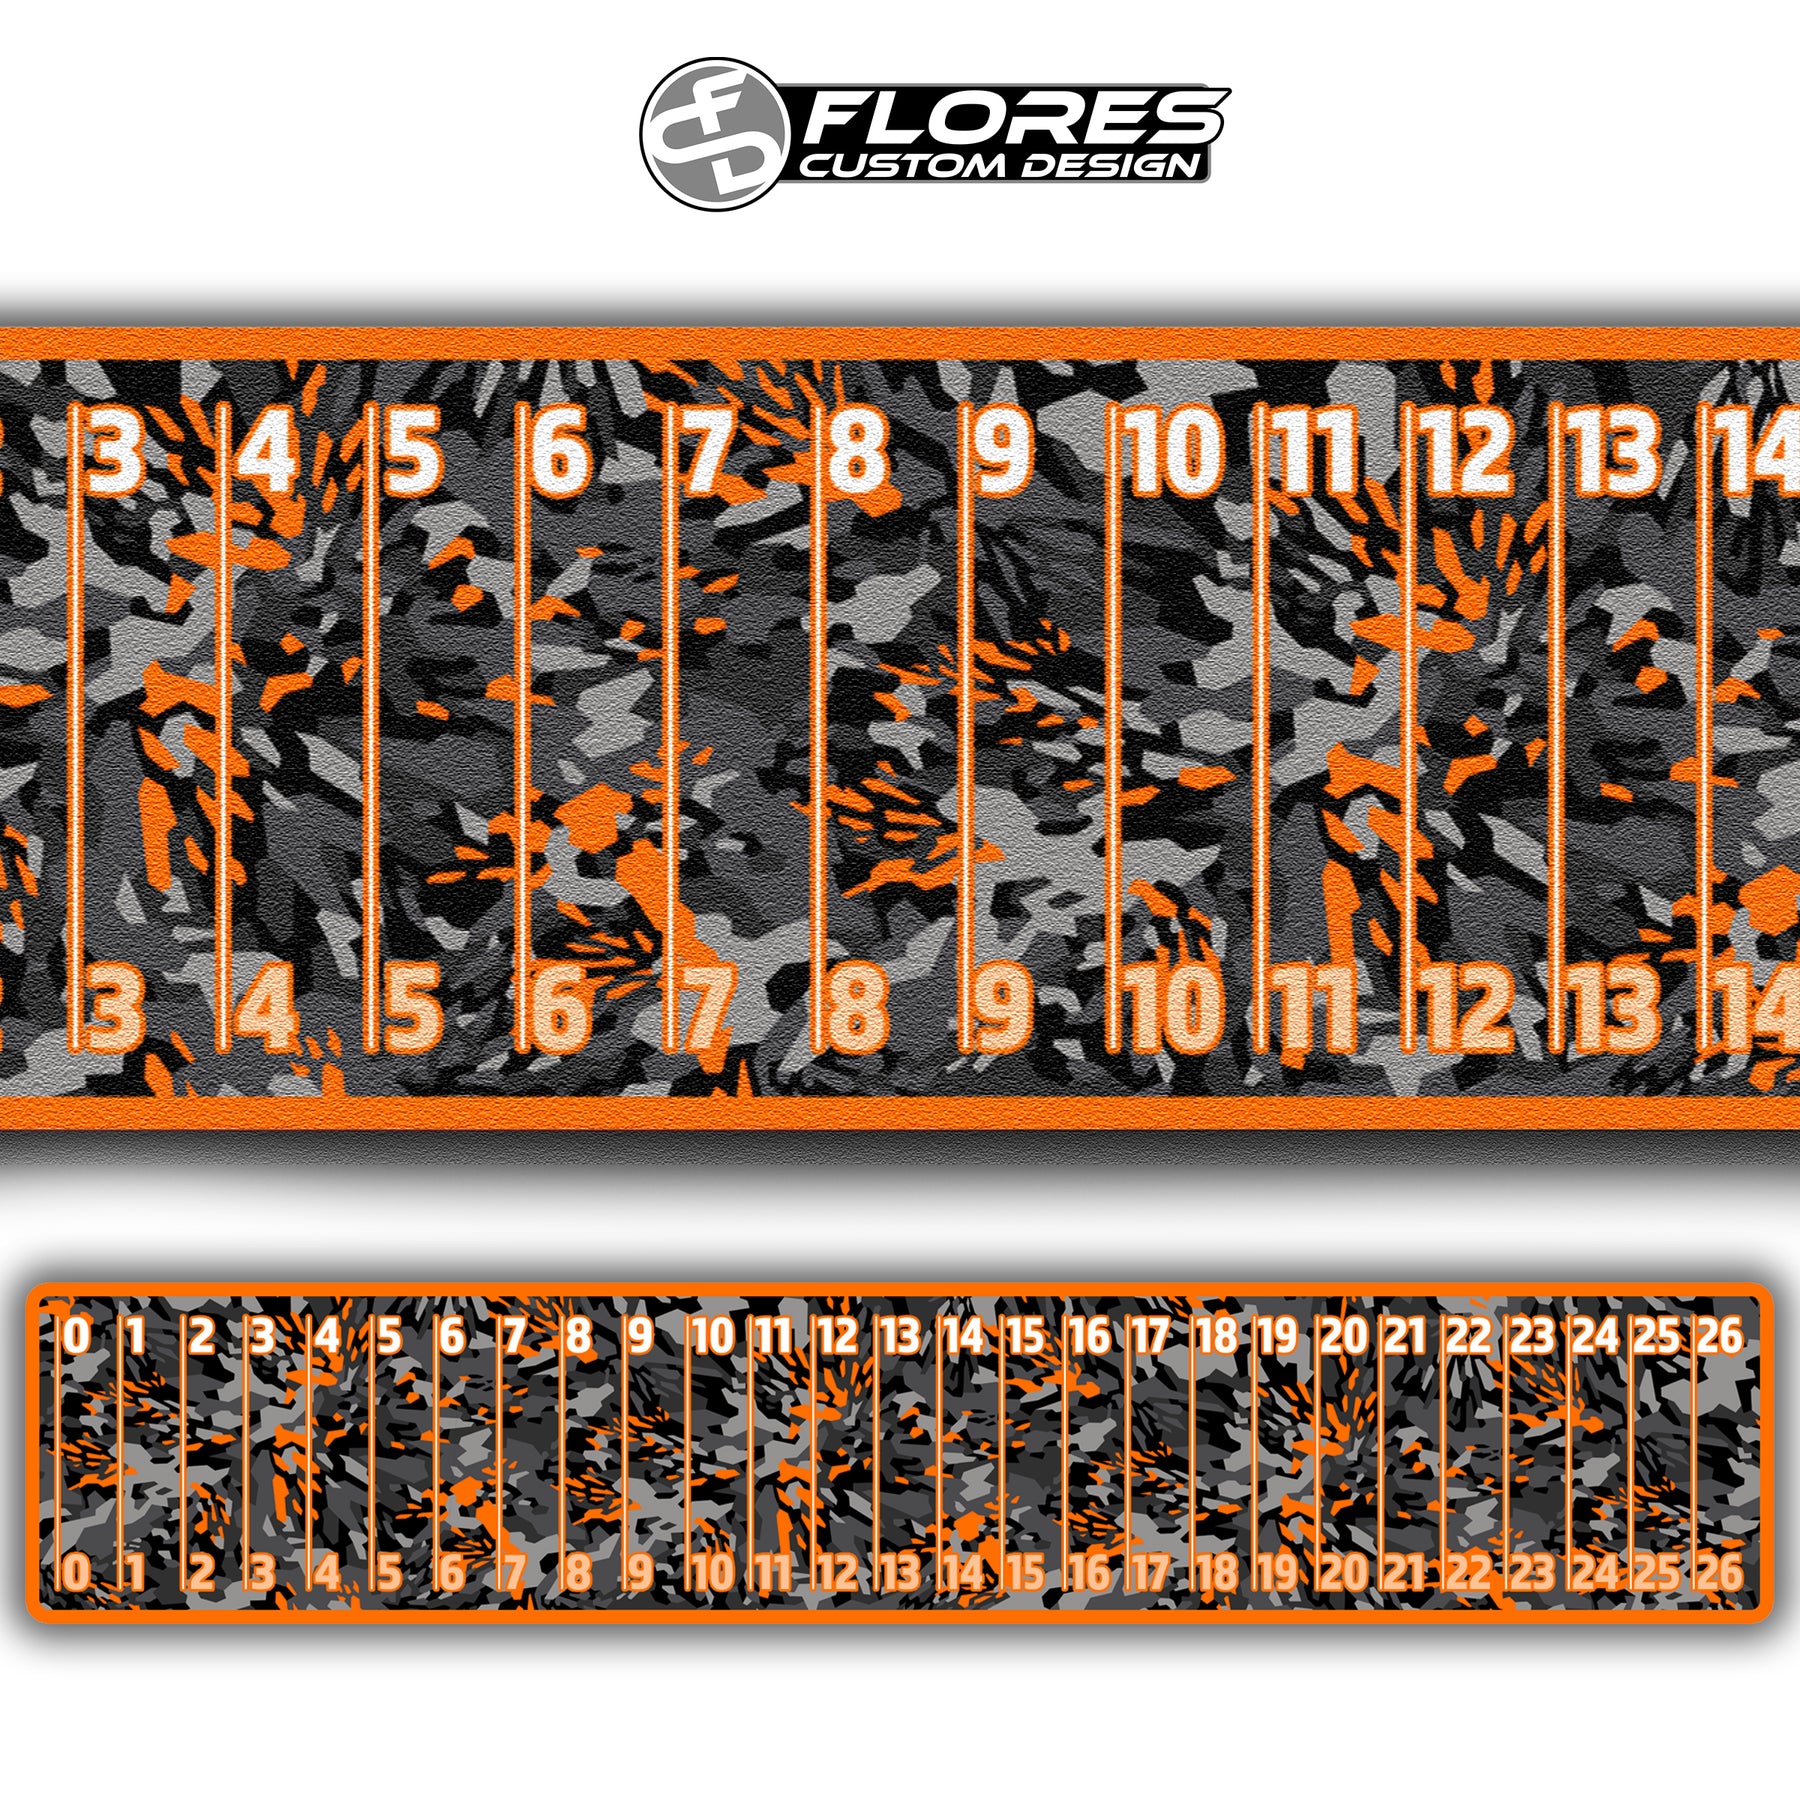 FS50 Boat Decal Ruler with Florida Rules